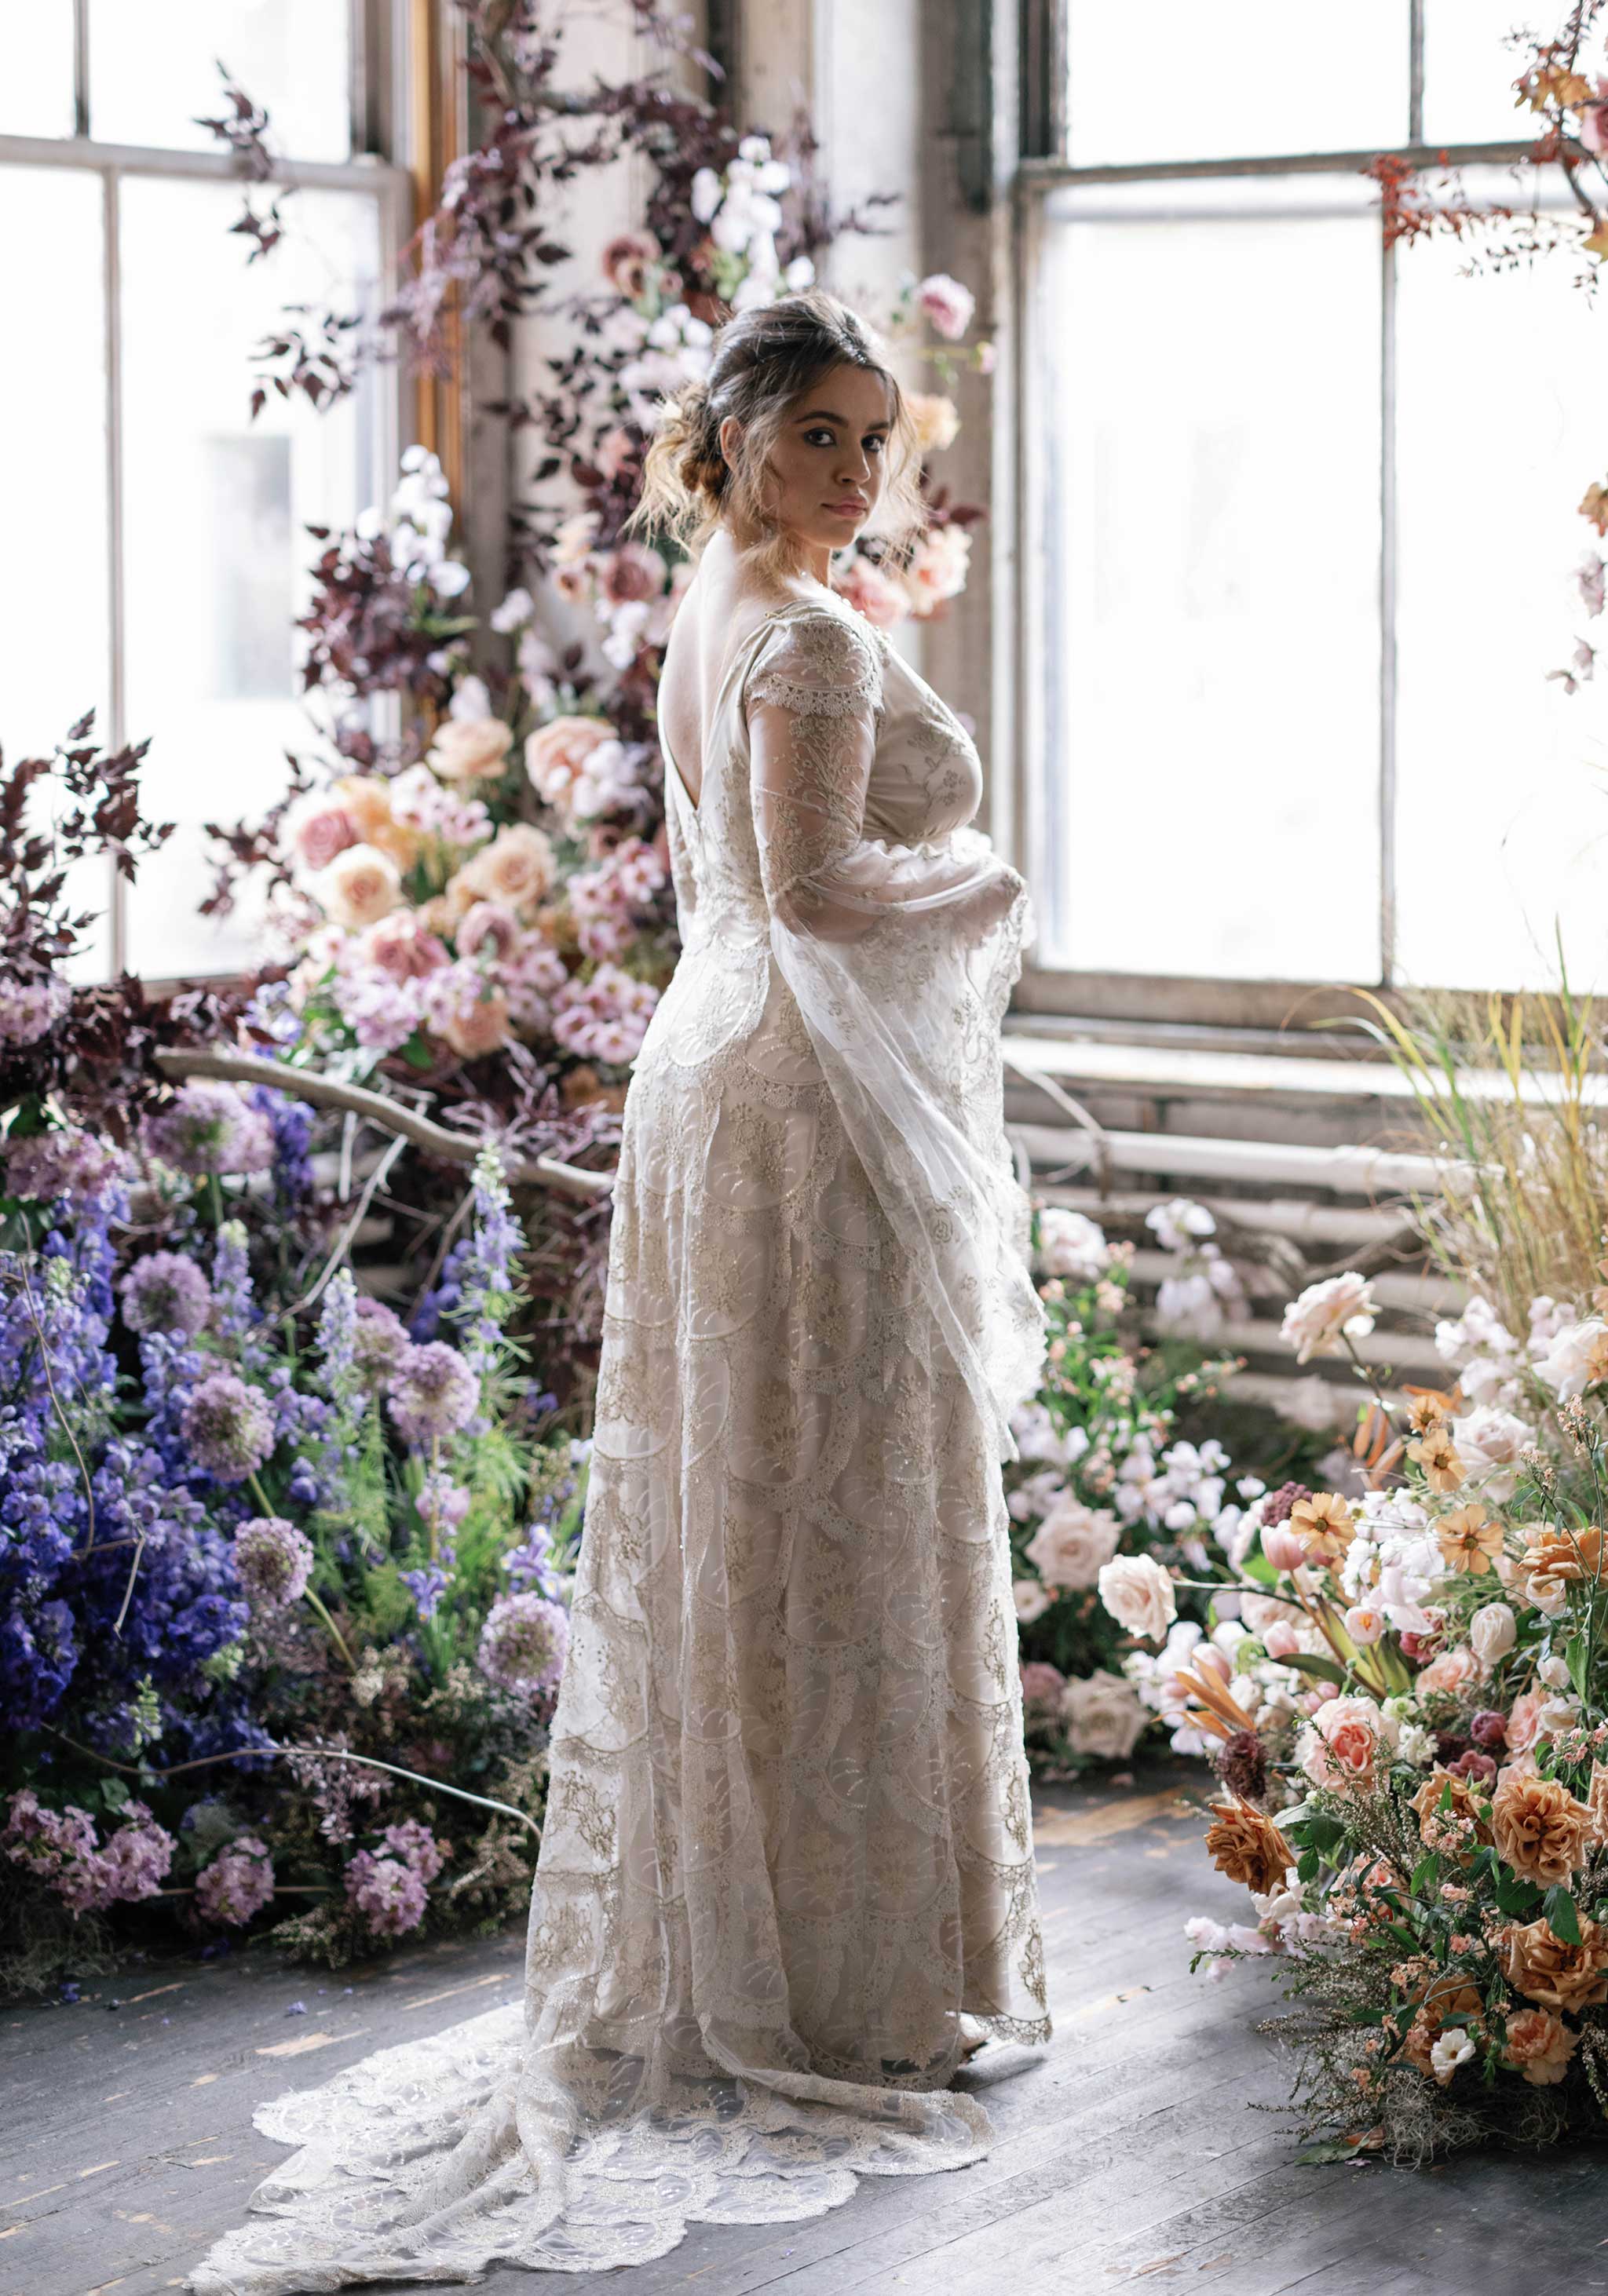 Wedding dress with sheer short sleeves and flowing skirt | INVITADISIMA